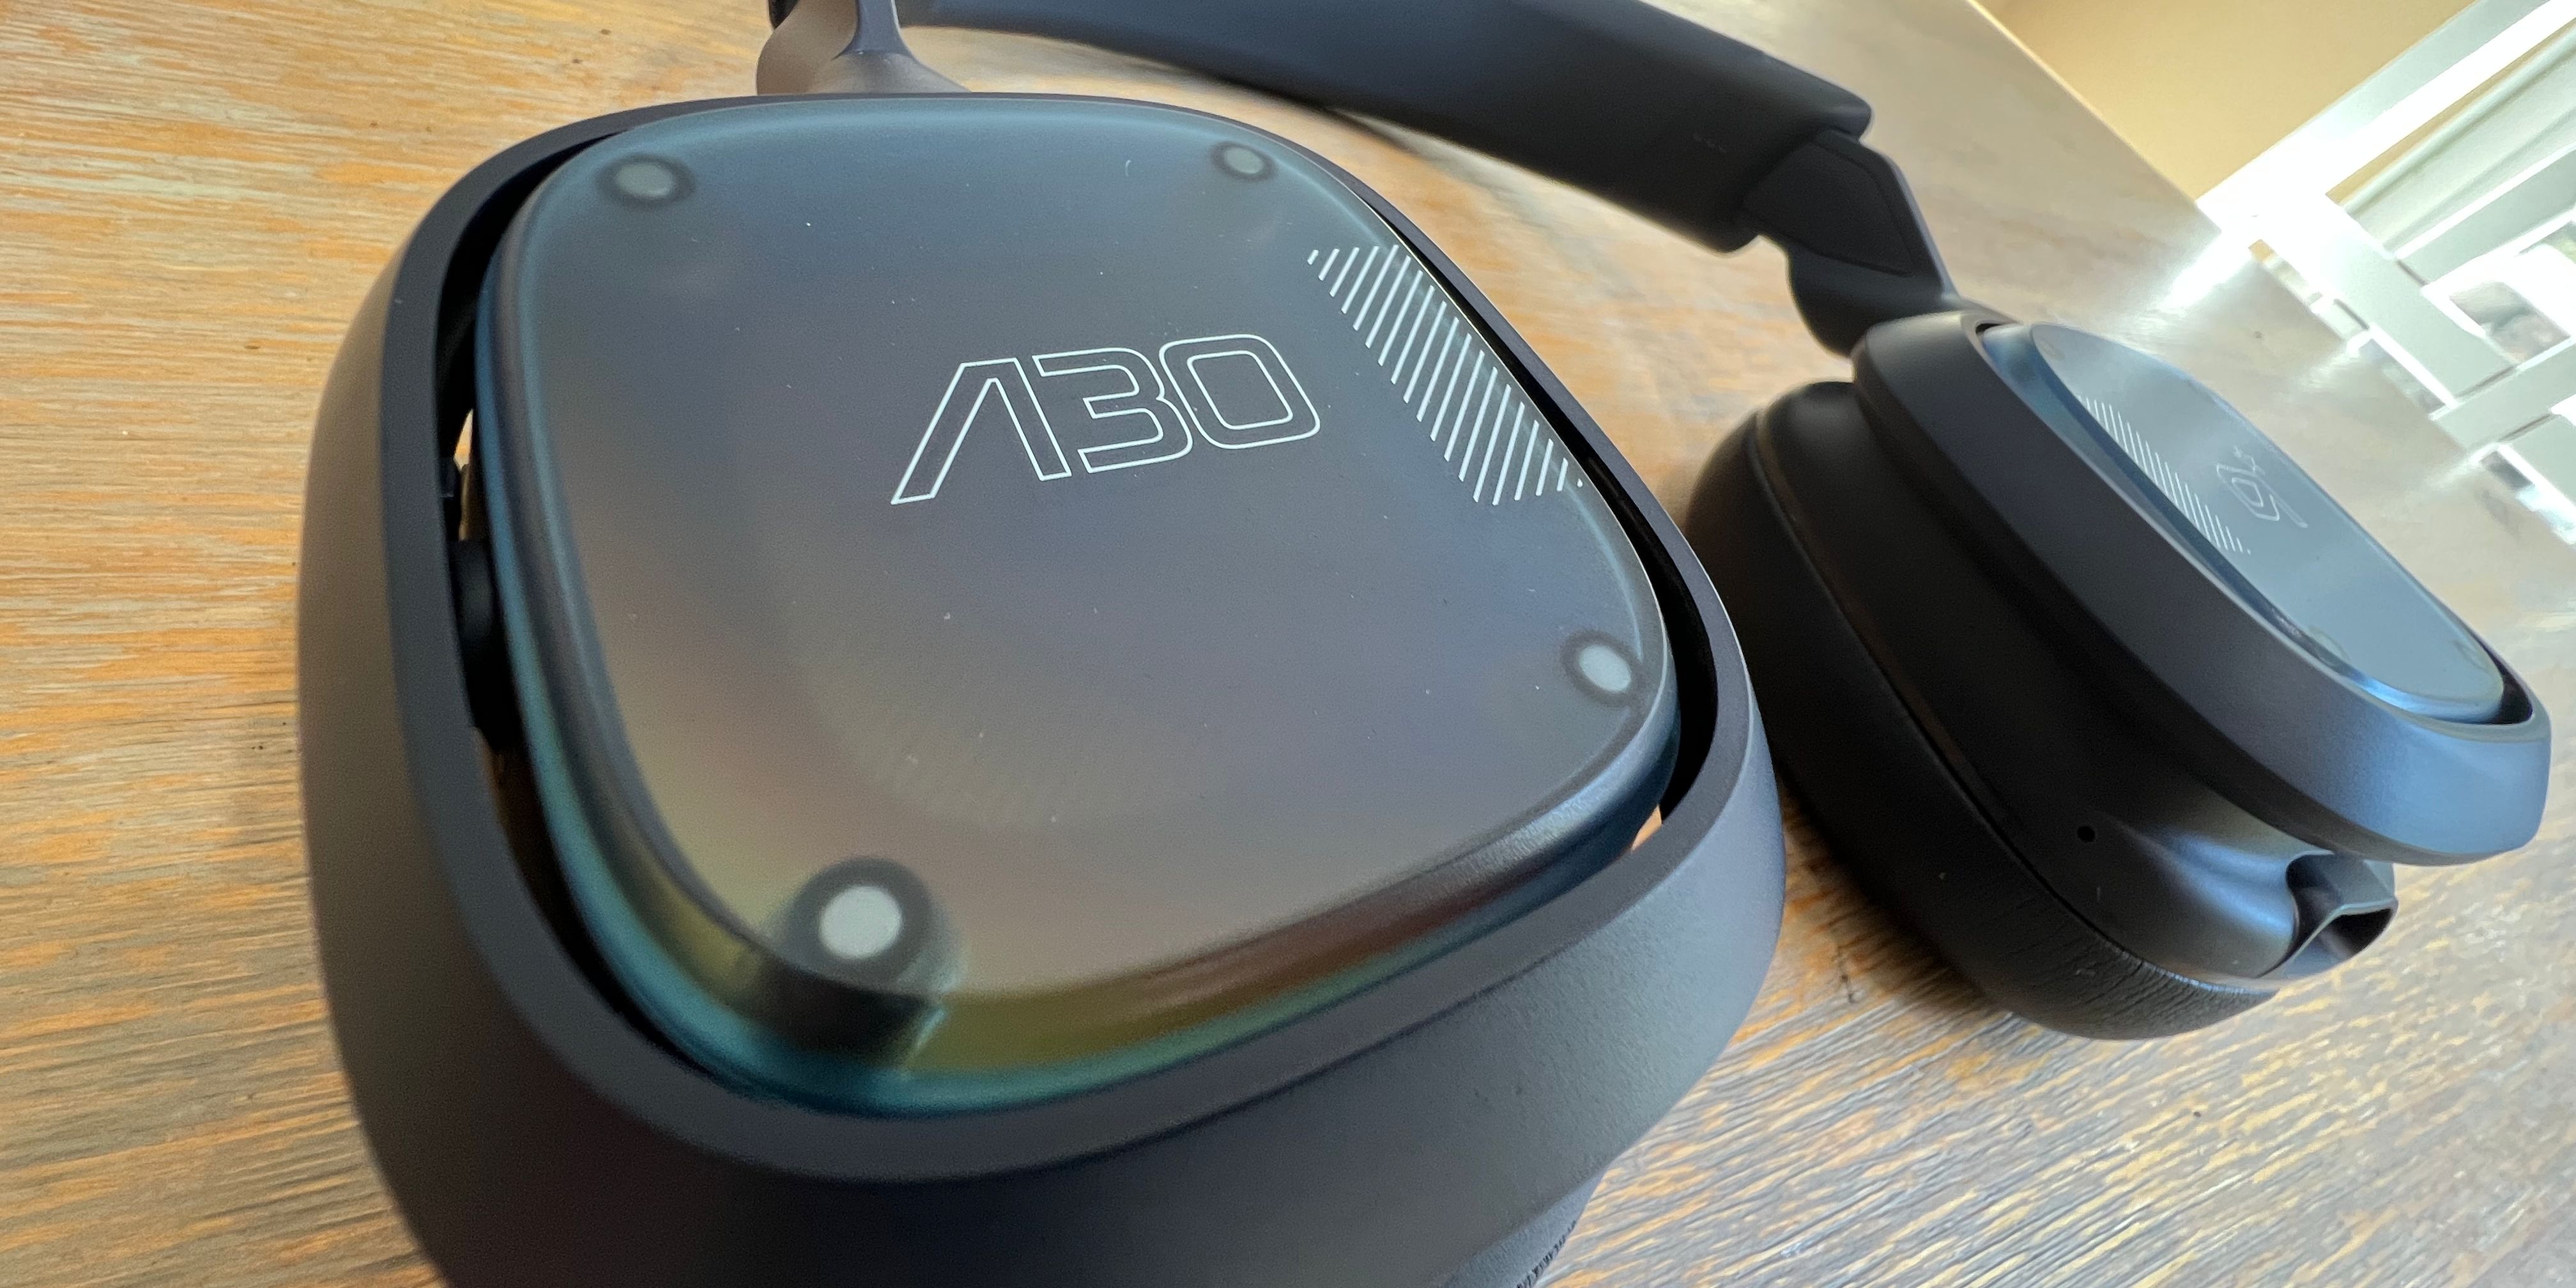 Astro A30 review: Is it the last gaming headset you'll ever need?